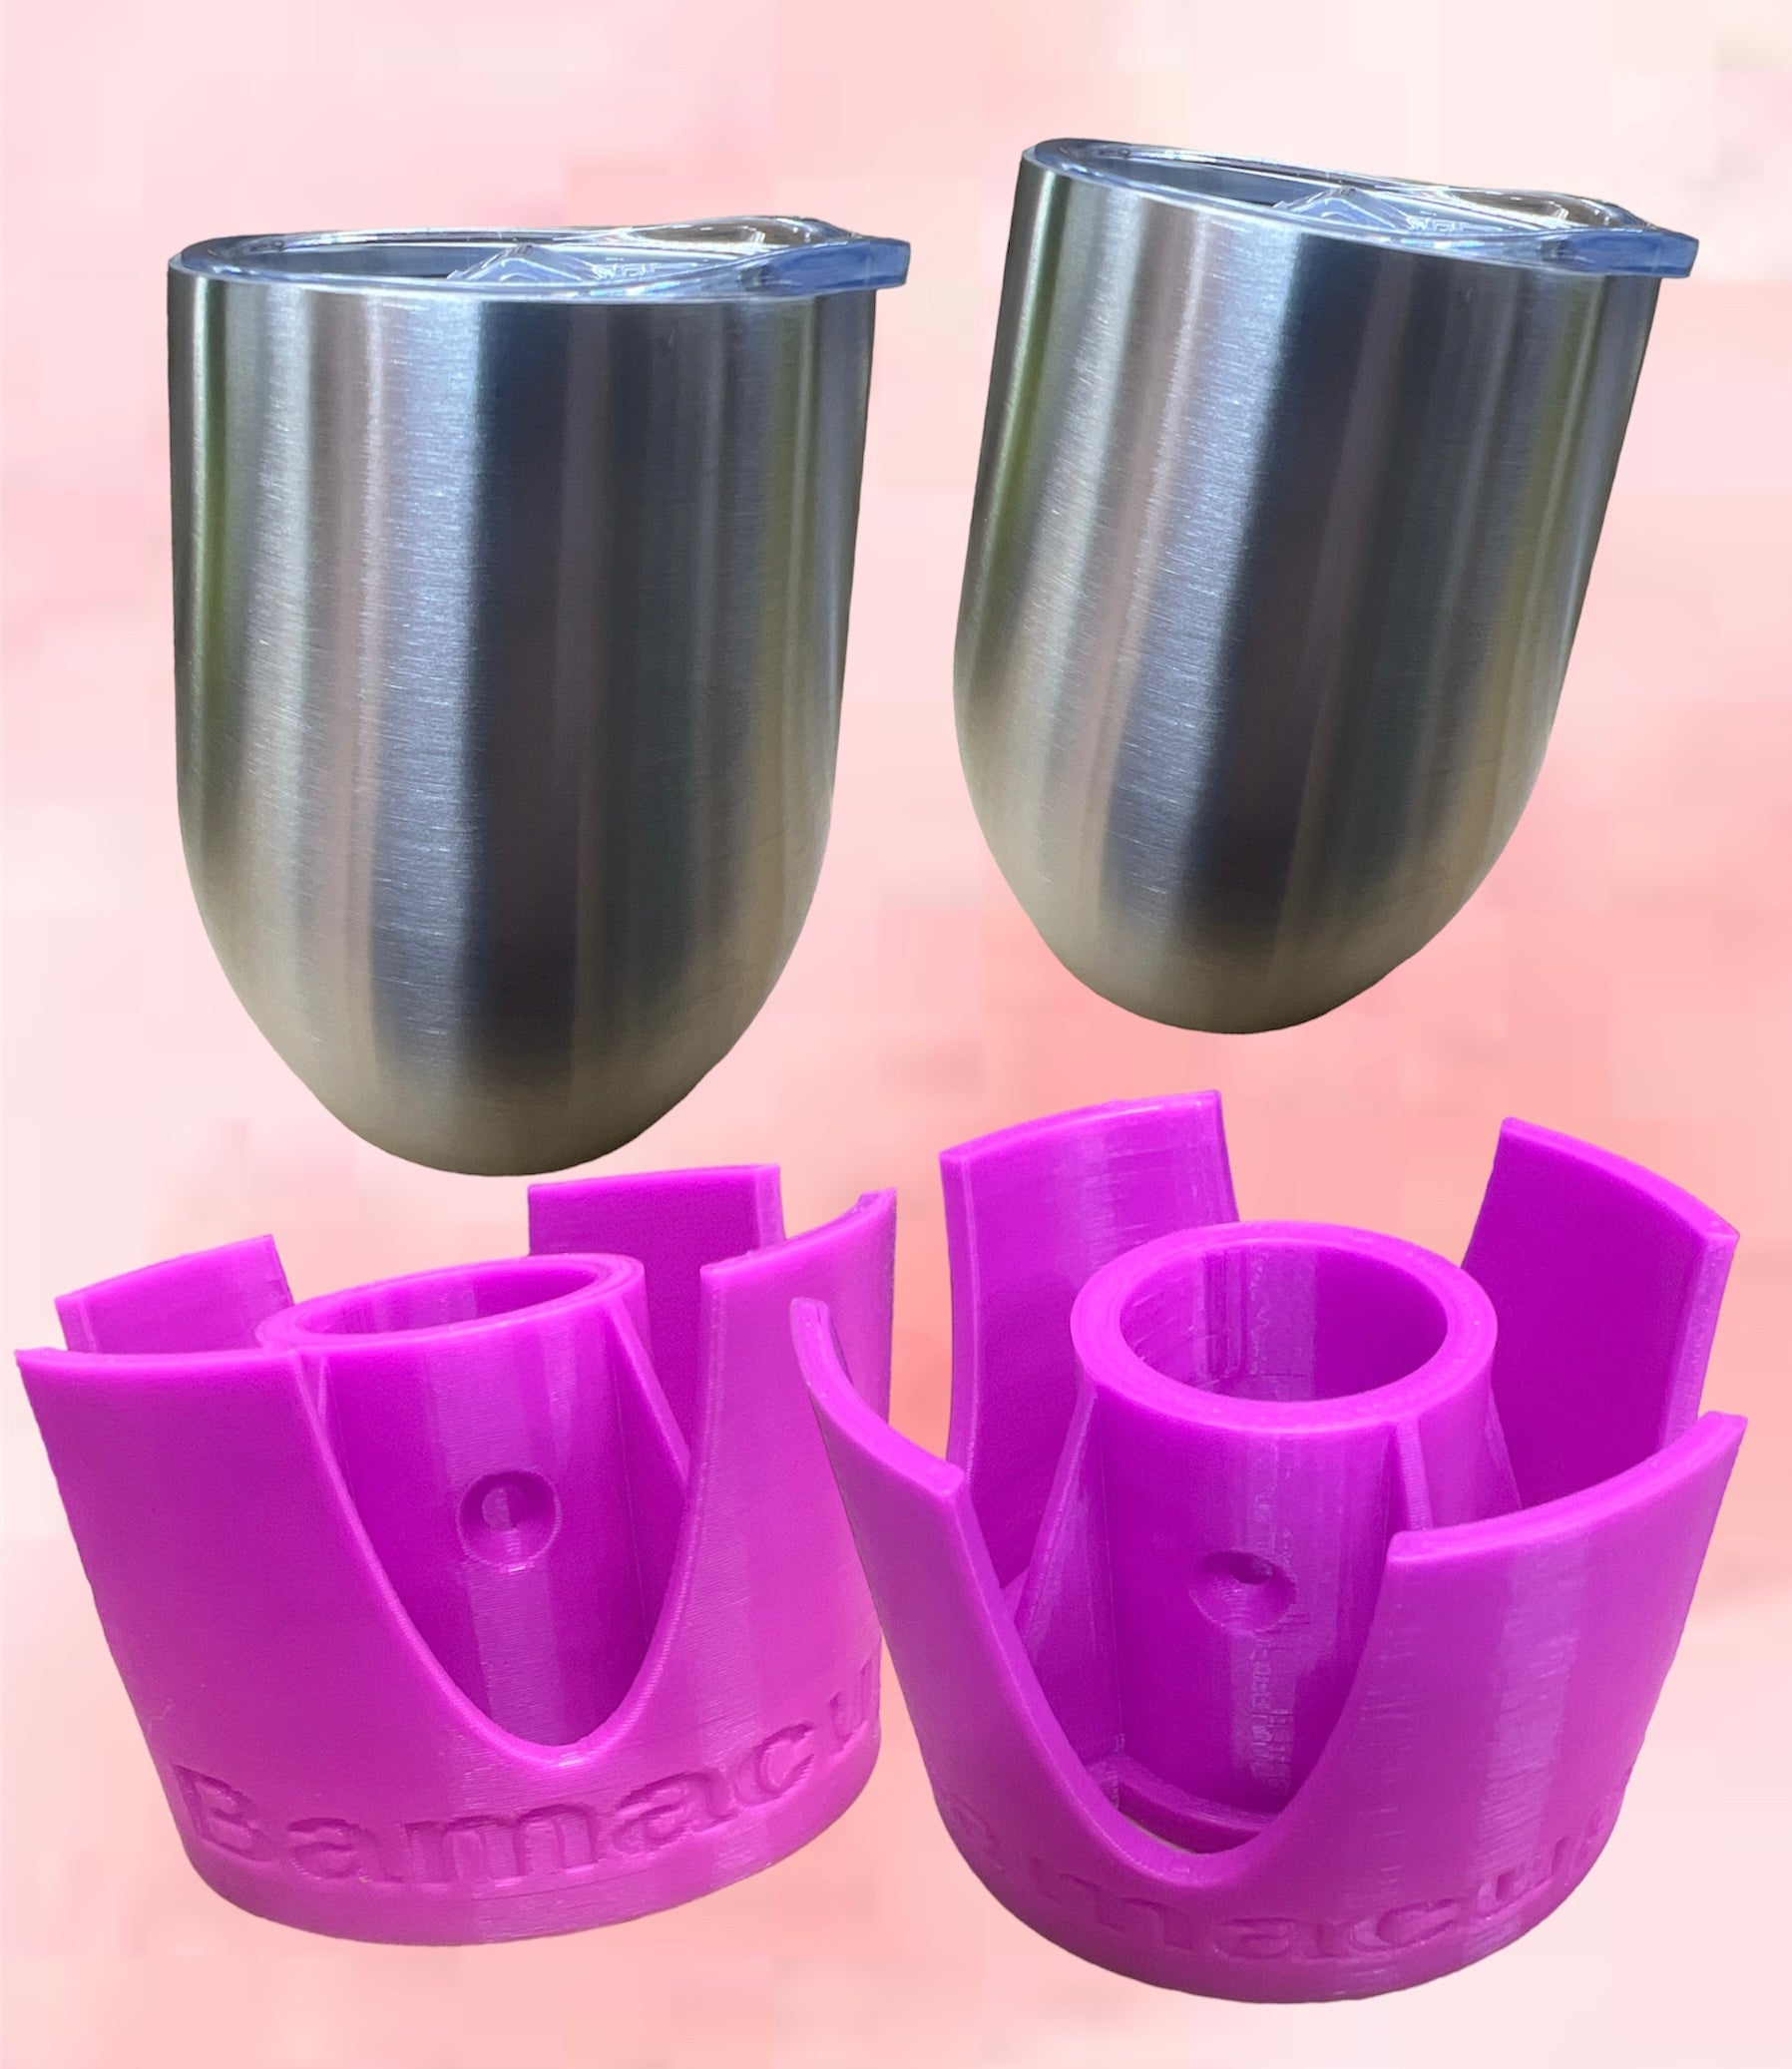 Cup Inserts and Adapters – Bama Cups